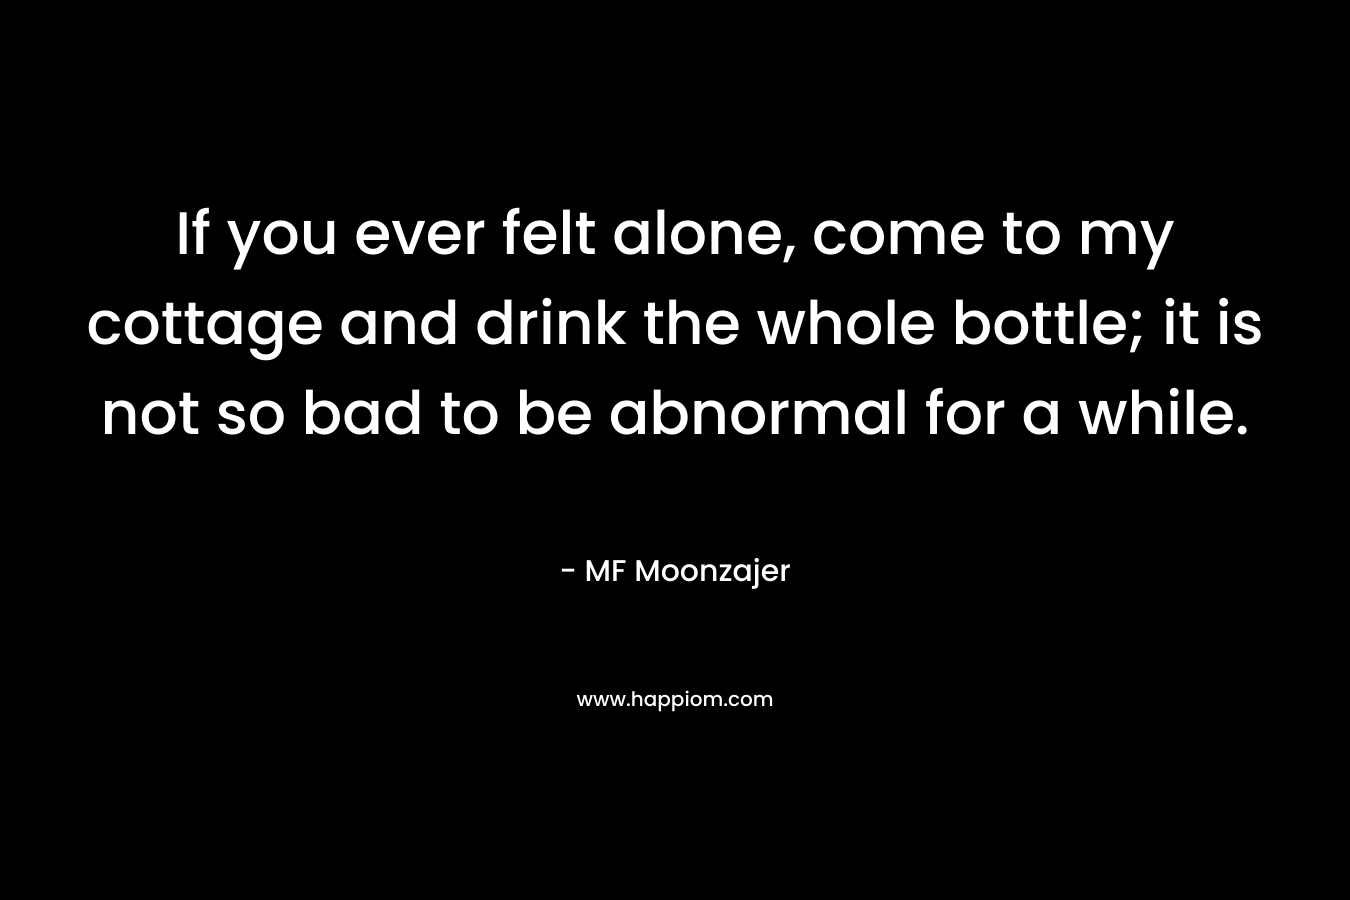 If you ever felt alone, come to my cottage and drink the whole bottle; it is not so bad to be abnormal for a while.